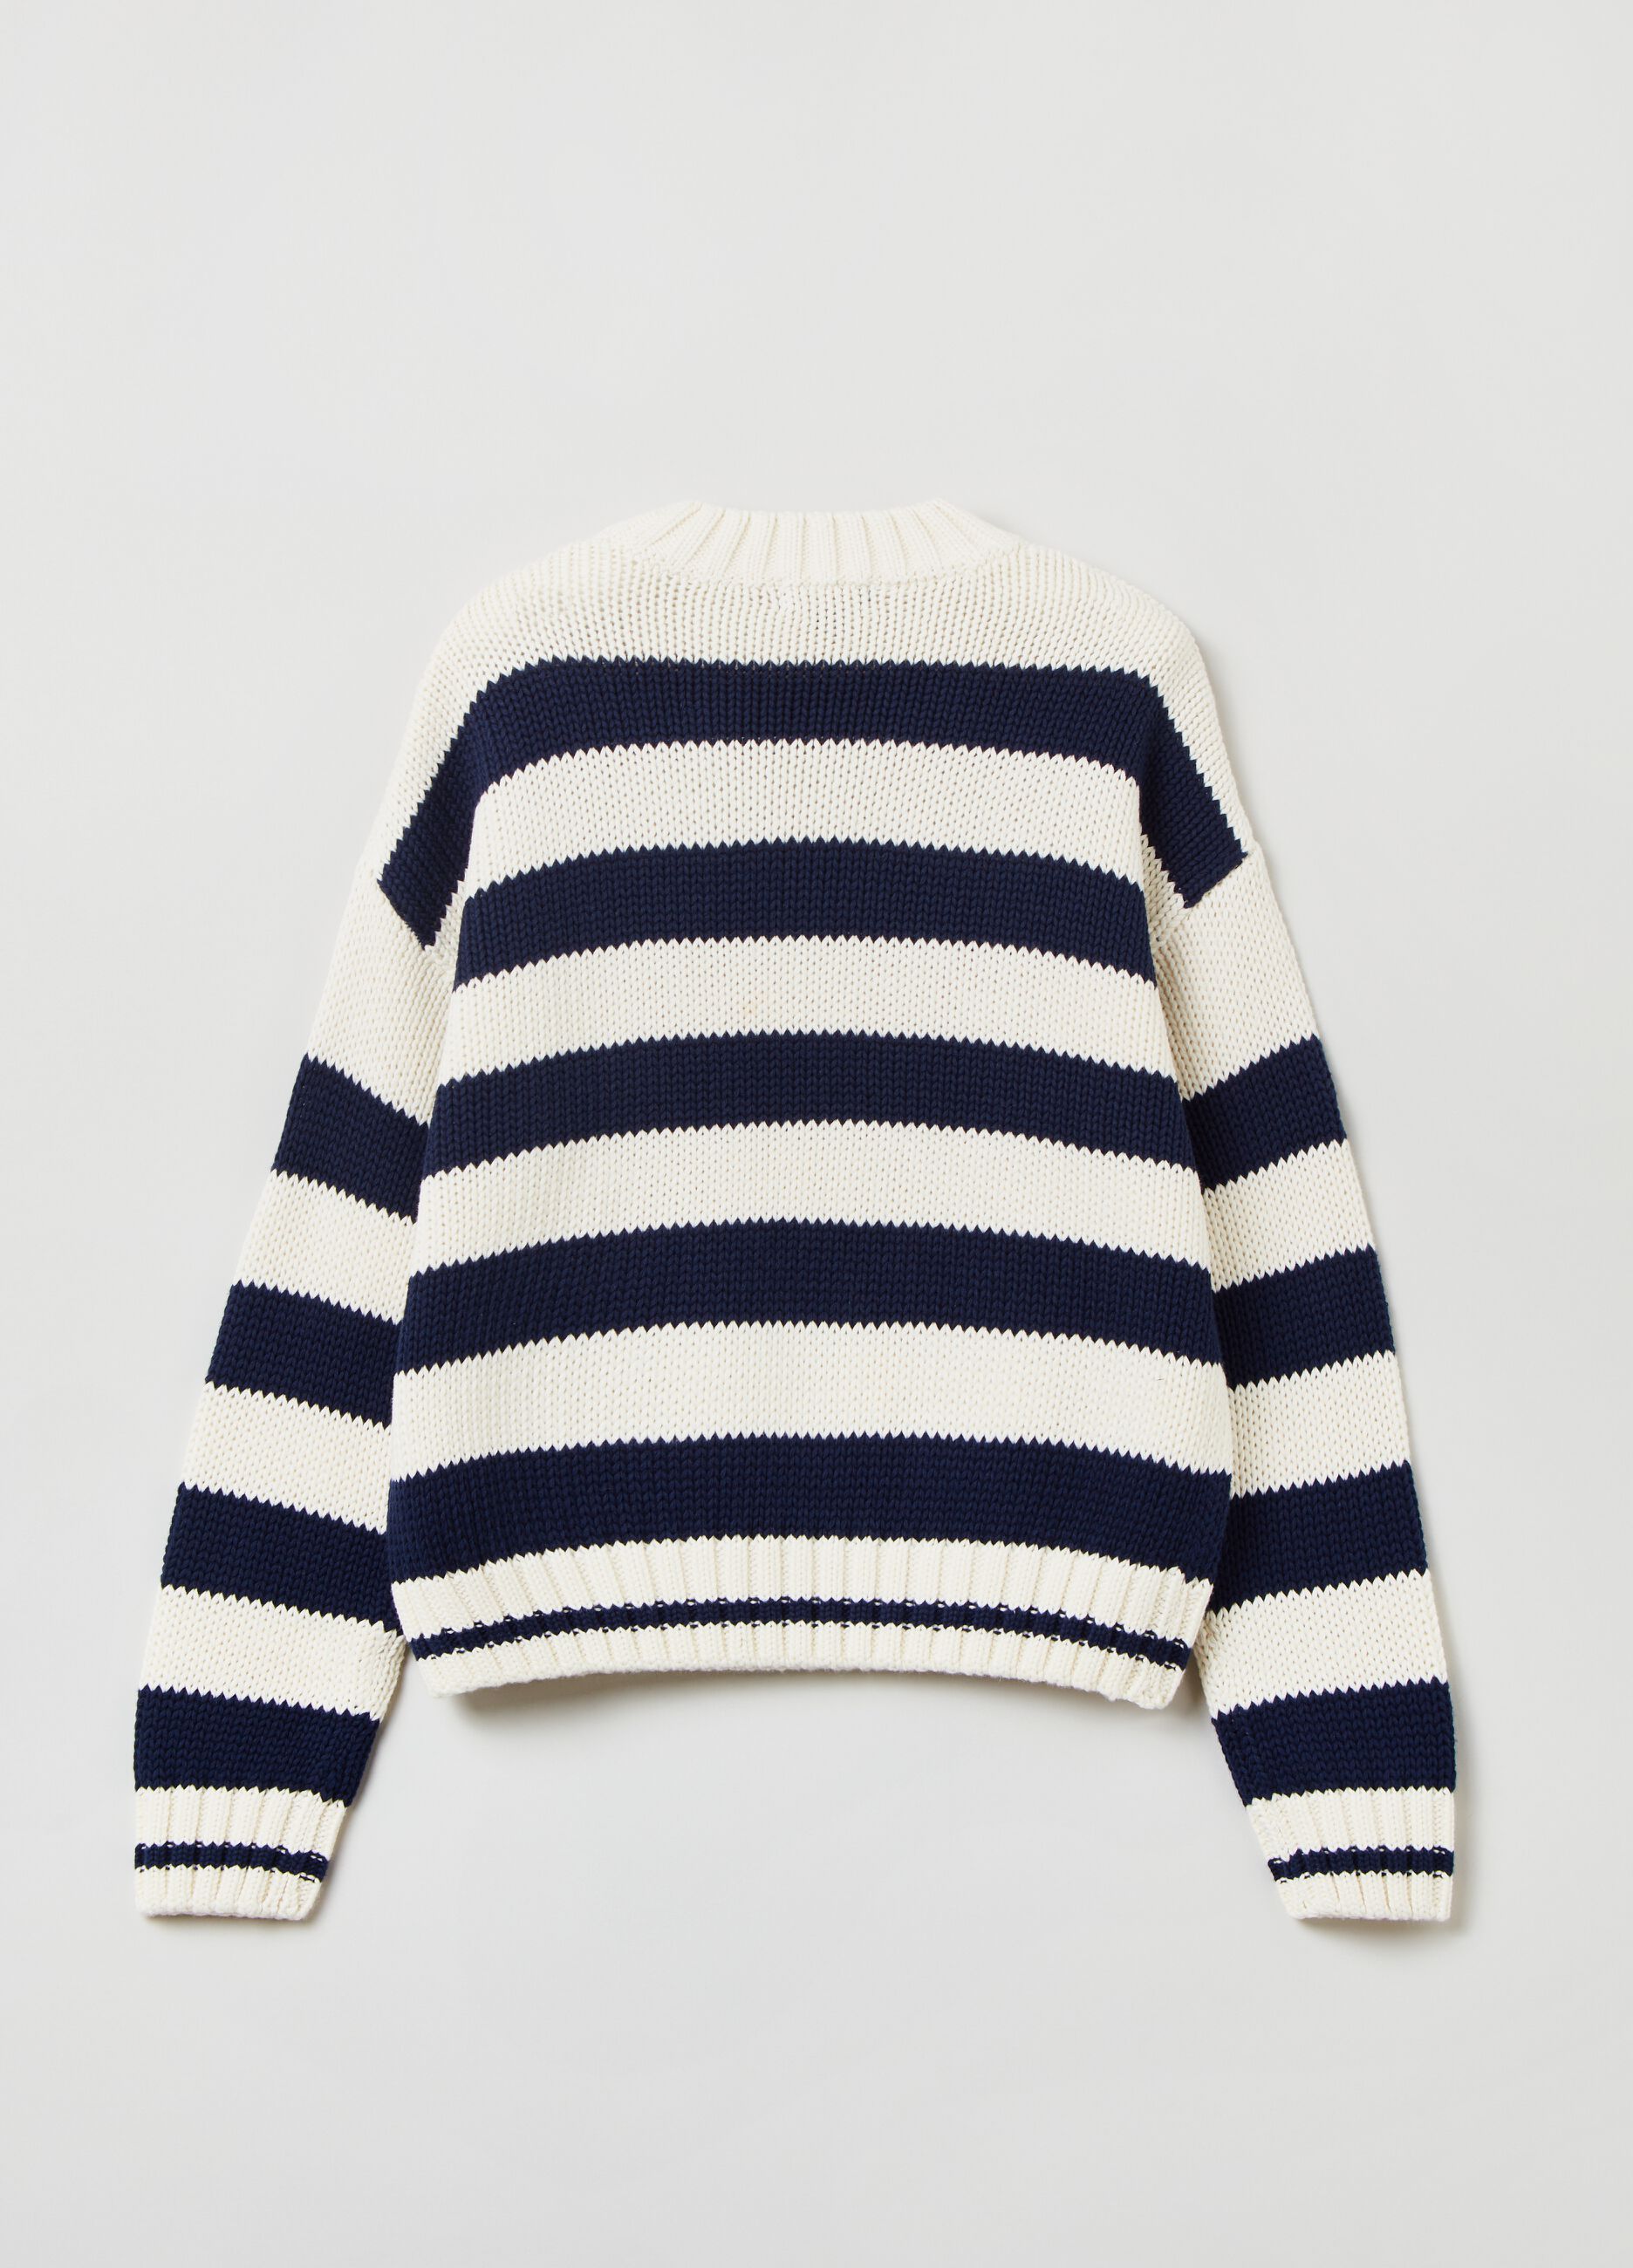 Cotton pullover with striped pattern